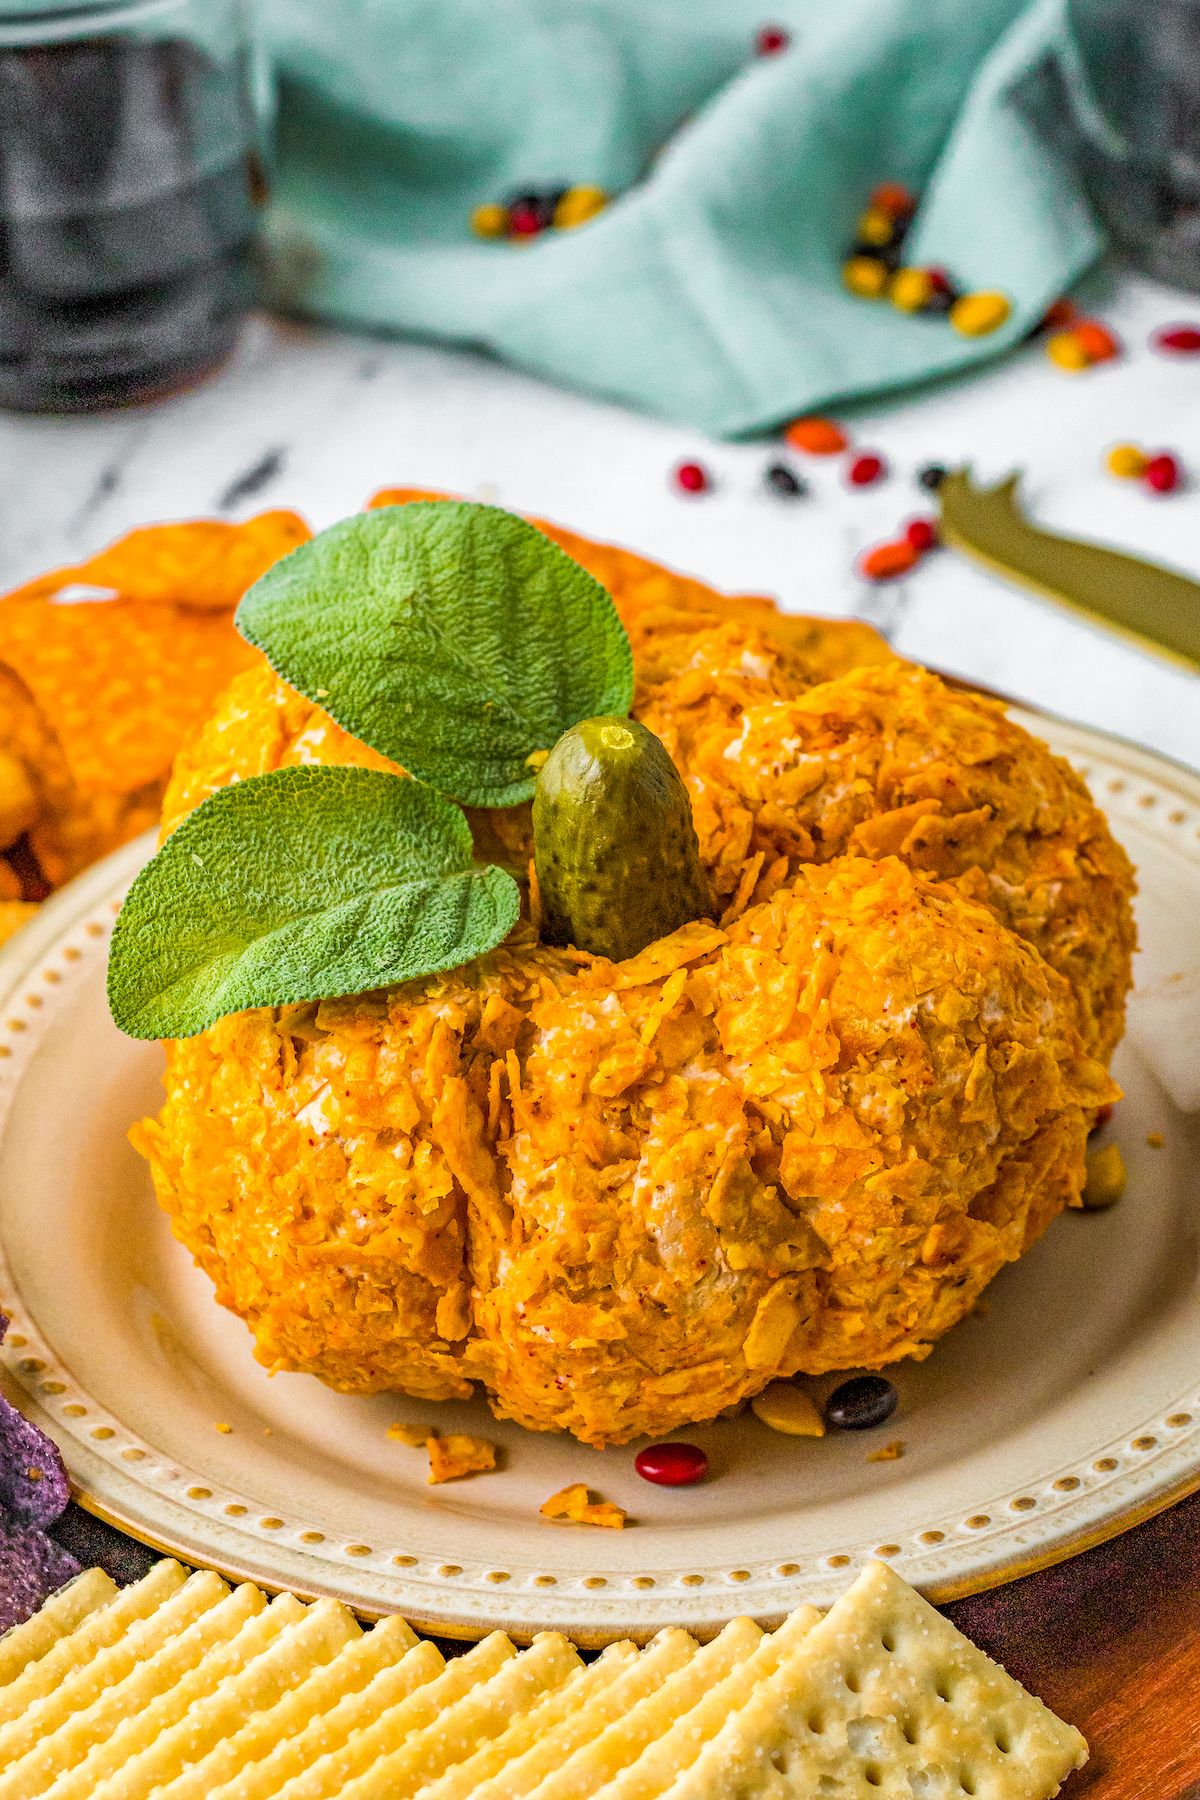 A pumpkin cheese ball with a pickle for a stem, and leaves.